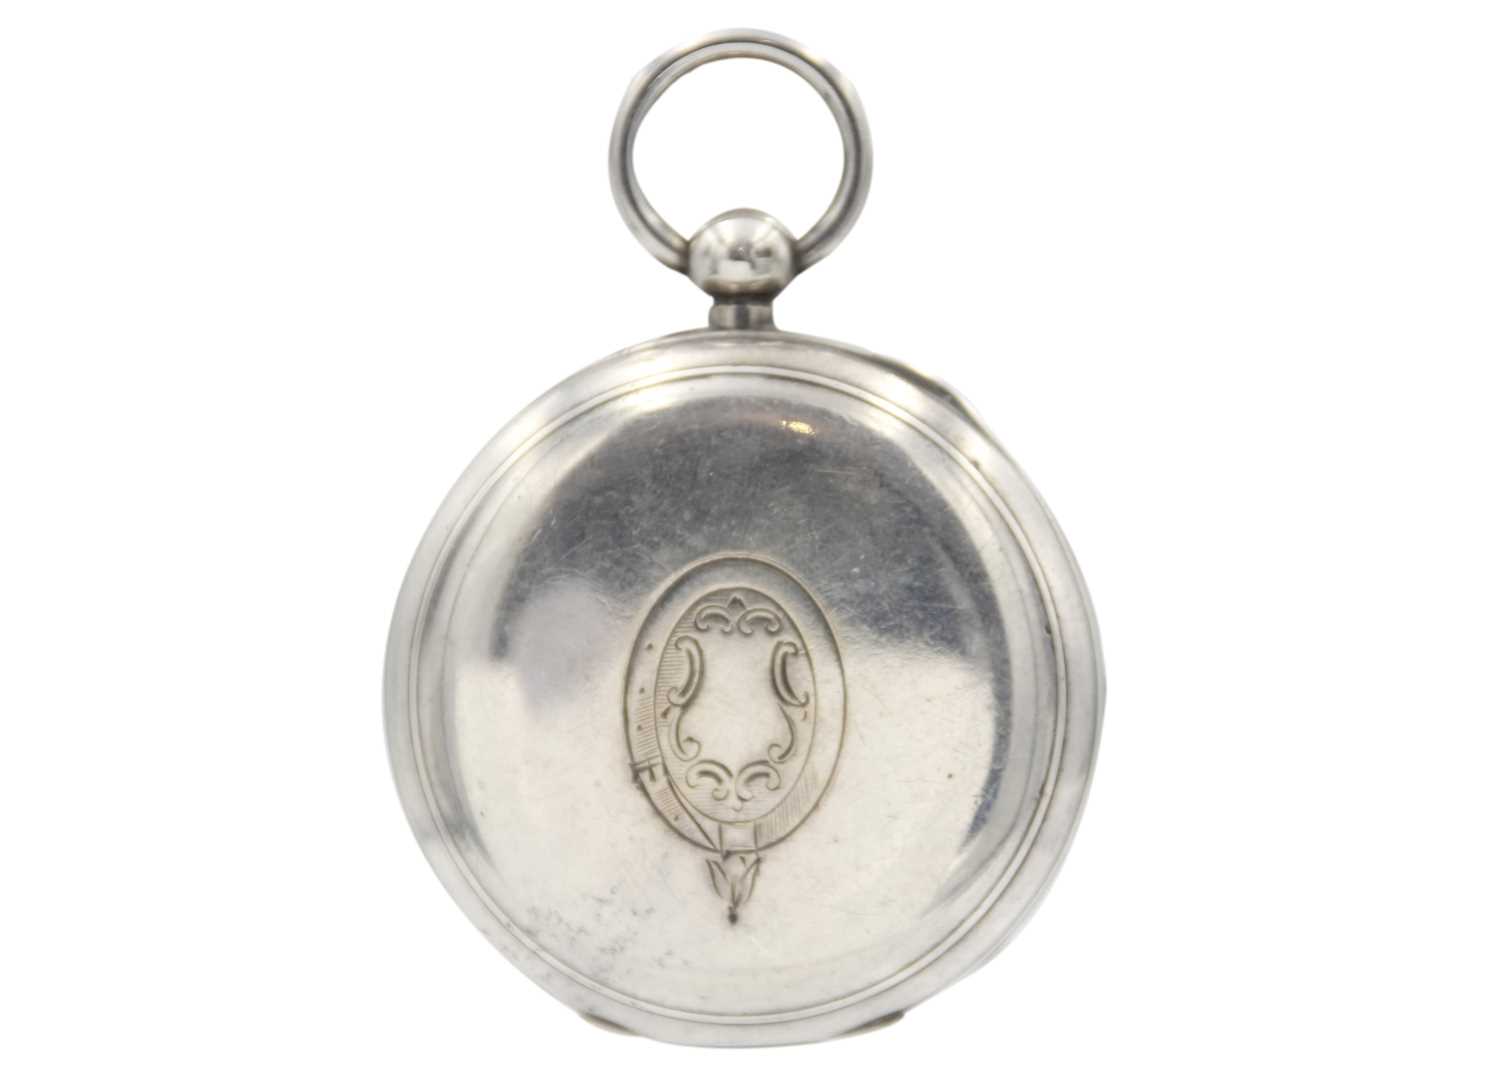 Two American Watch Co. Waltham silver-cased key wind pocket watches. - Image 7 of 7